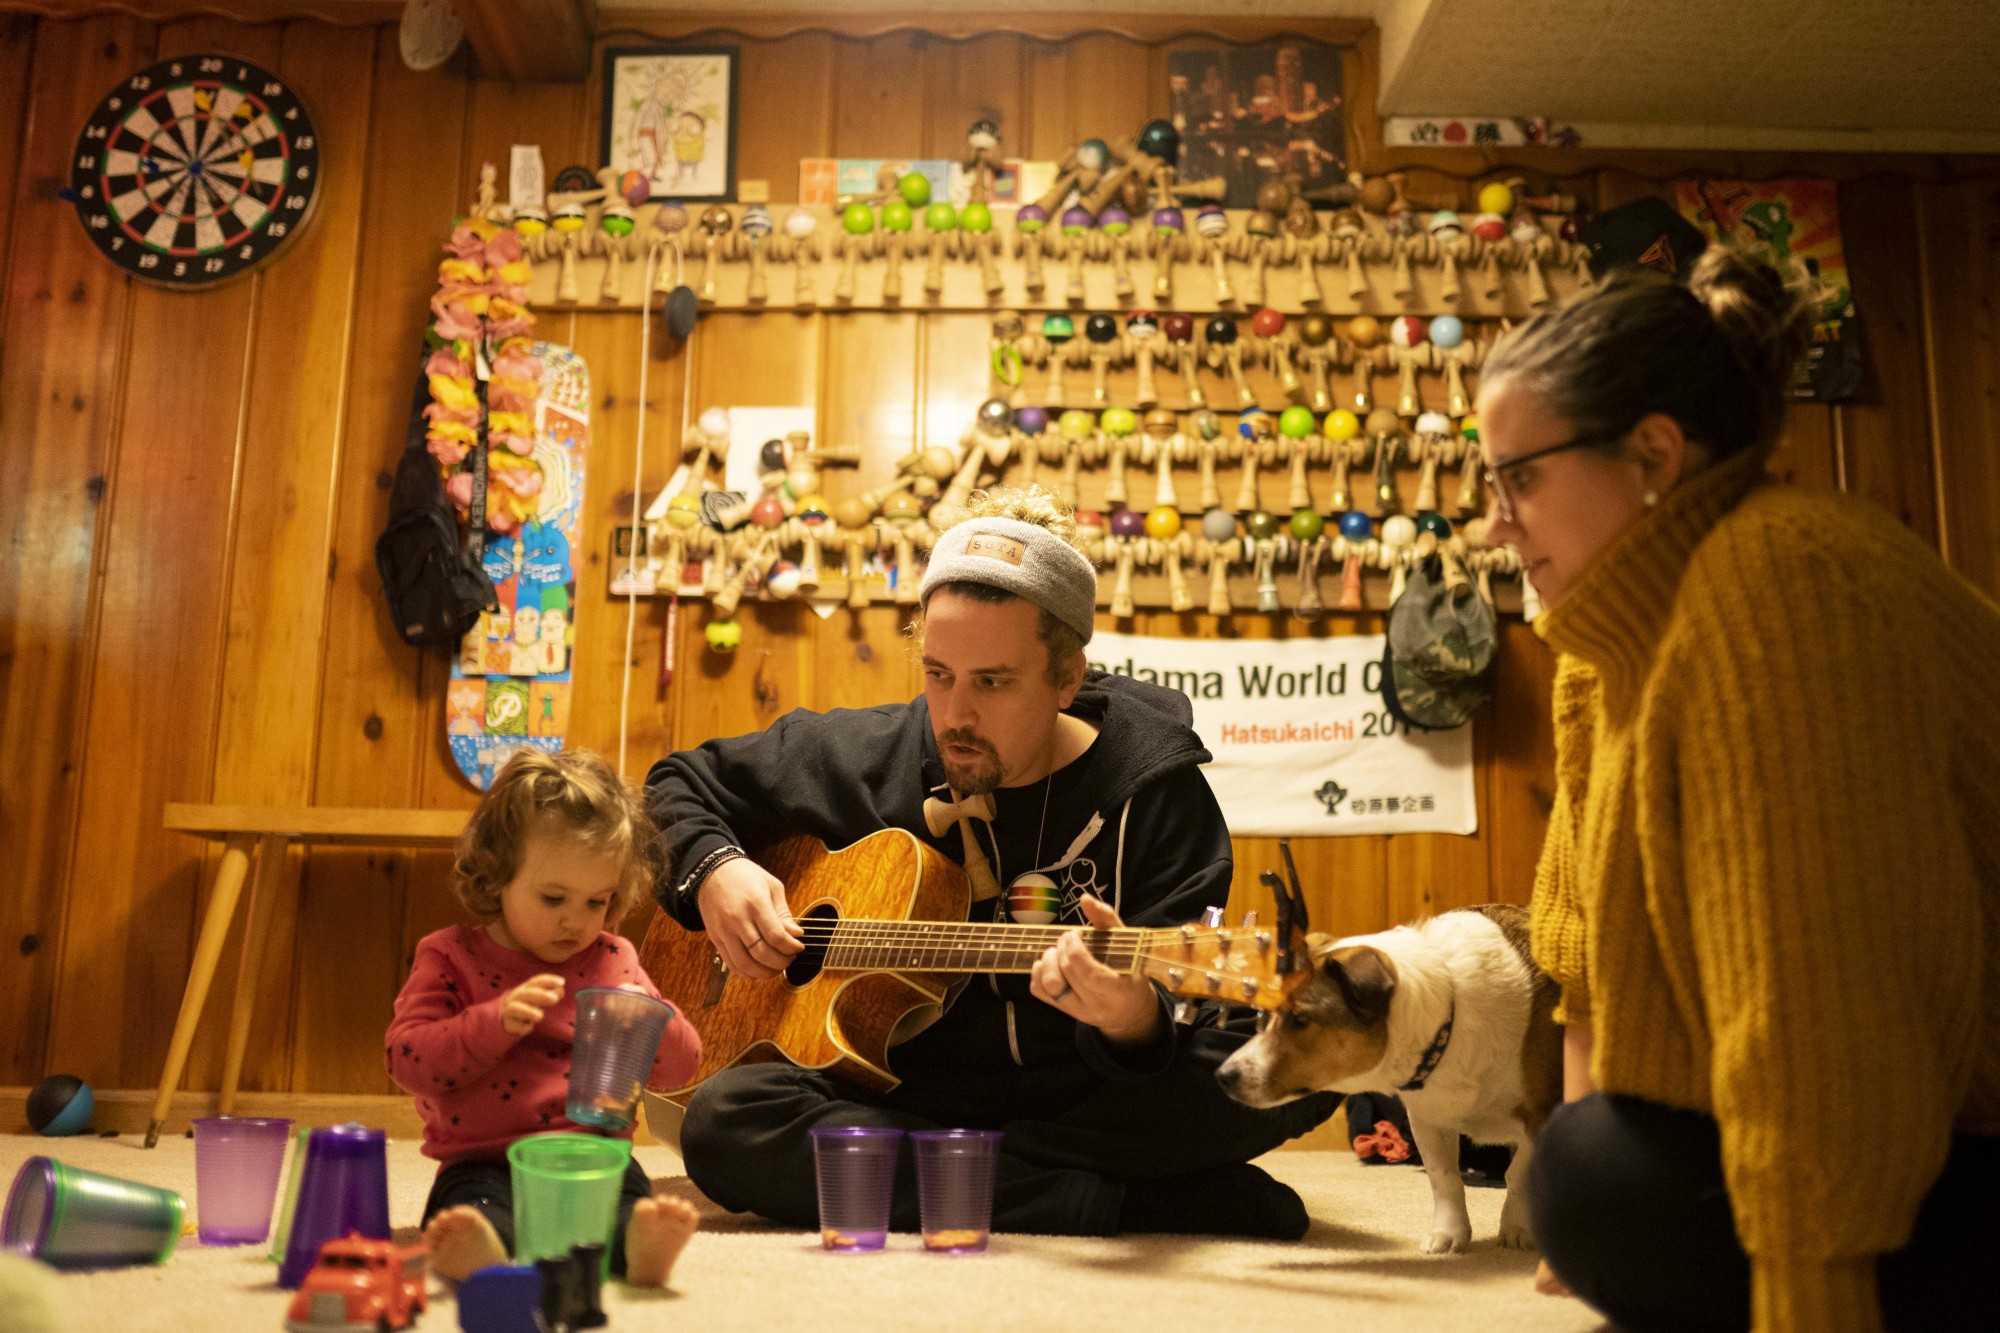 Jorgenson, plays guitar for his daughter, Emma, left, and wife, Alex, right, in his home on Monday, Dec. 2 before he leaves for a weeklong trip to judge internationally. Seen behind him is a fraction of the Kendamas Jorgenson has collected over the years. 